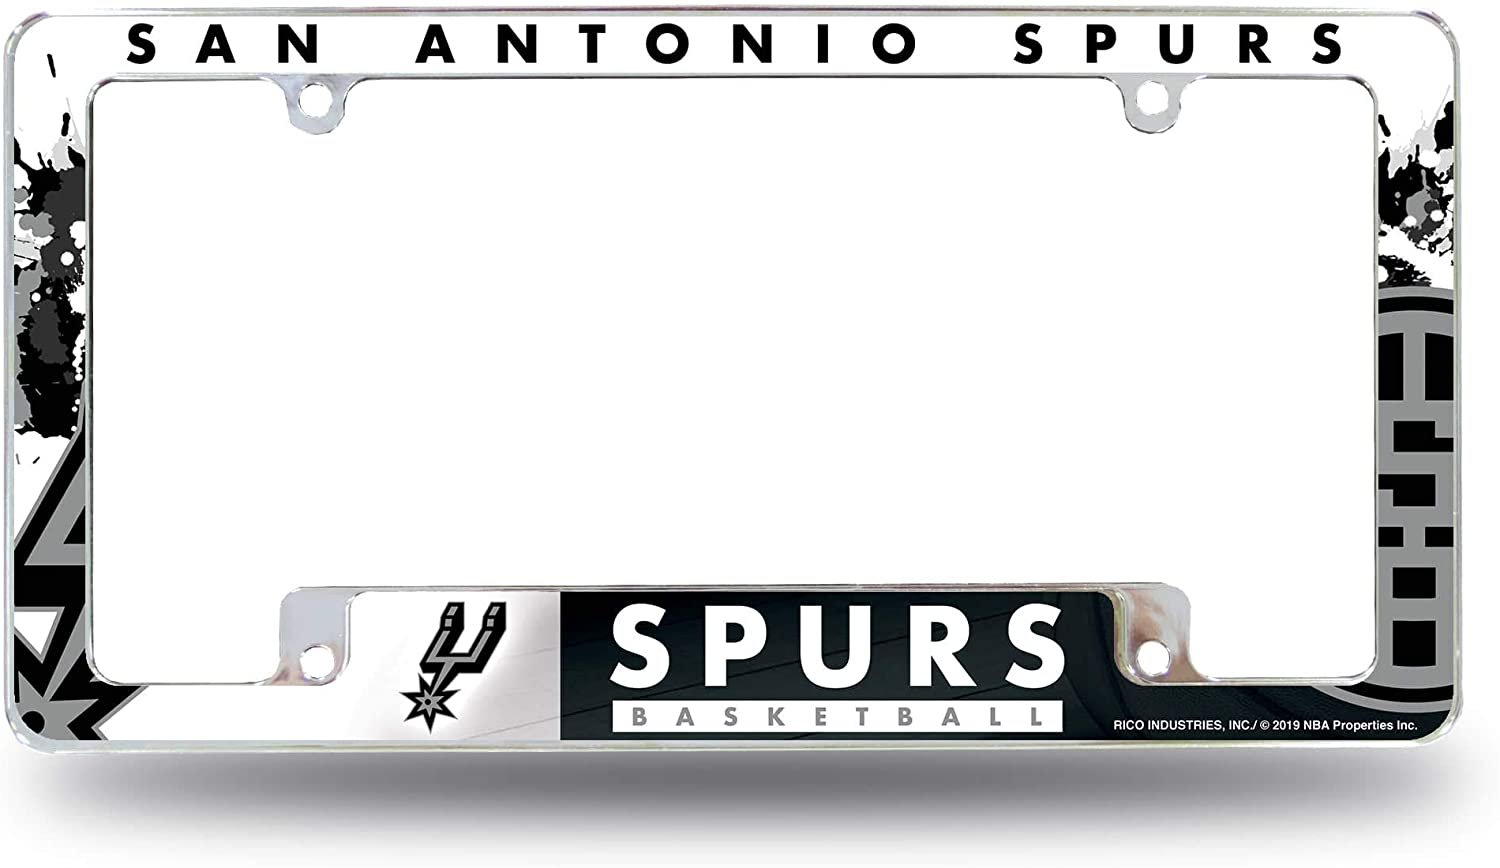 San Antonio Spurs Metal License Plate Frame Chrome Tag Cover All Over Design 12x6 Inch